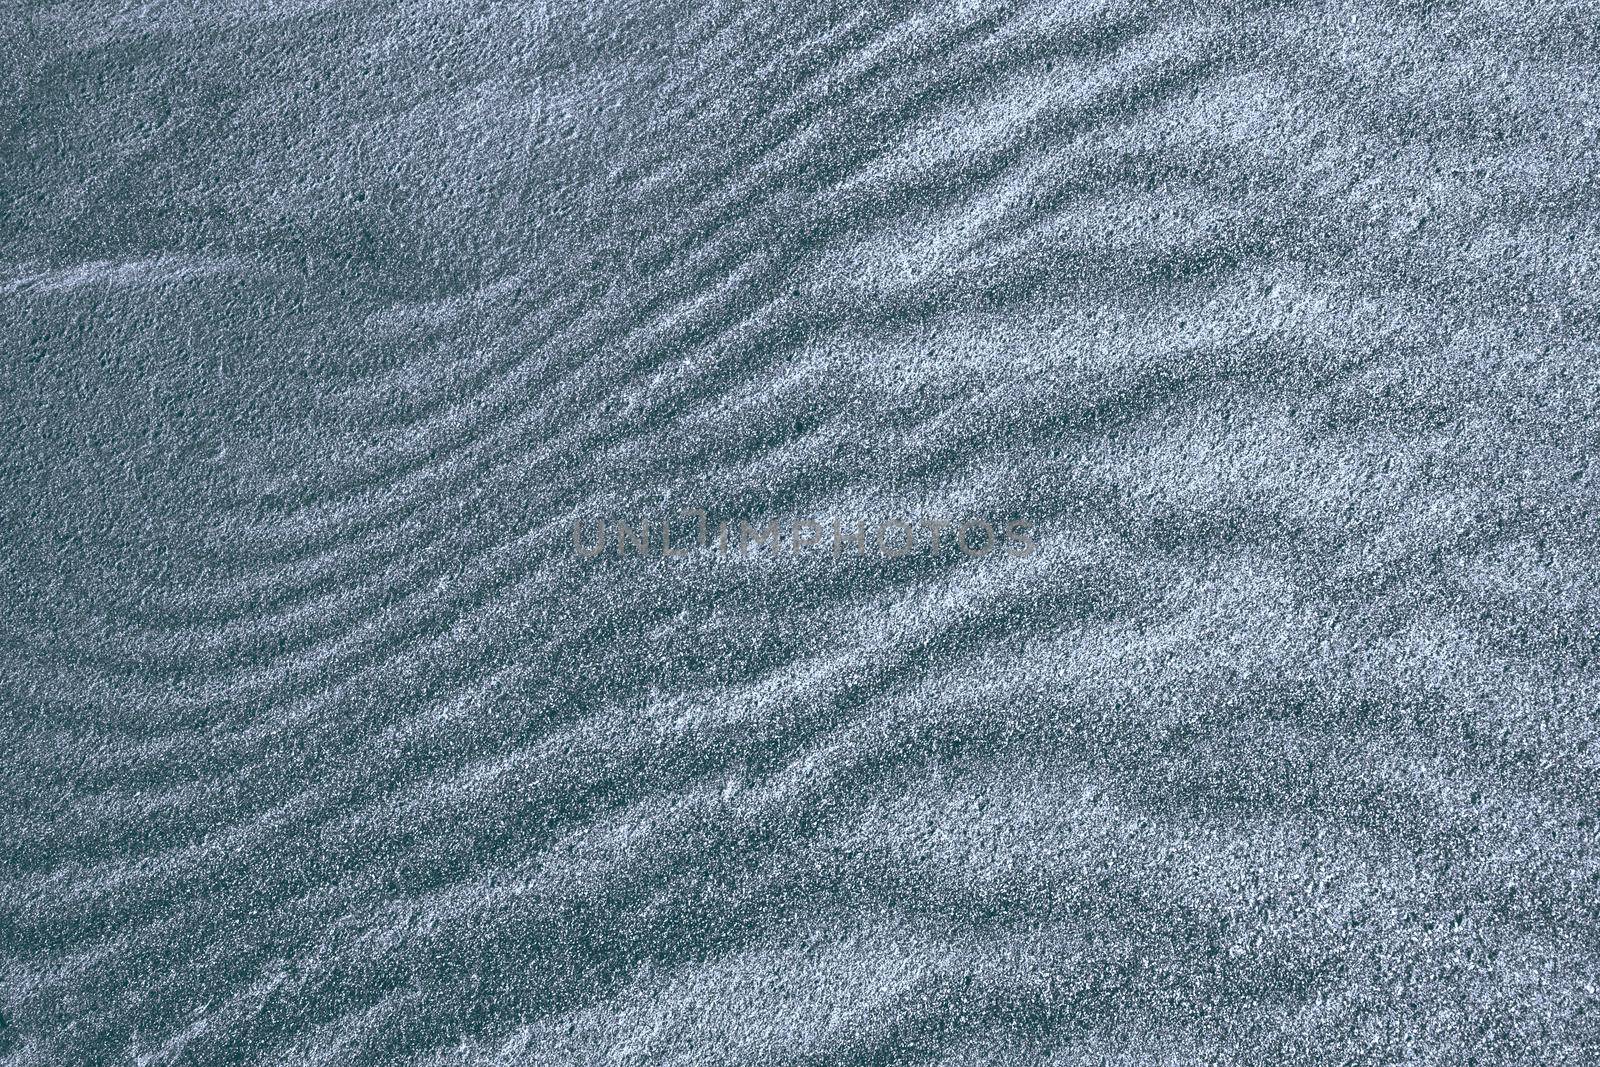 Background, texture, wave pattern of oceanic sand on the beach, dark